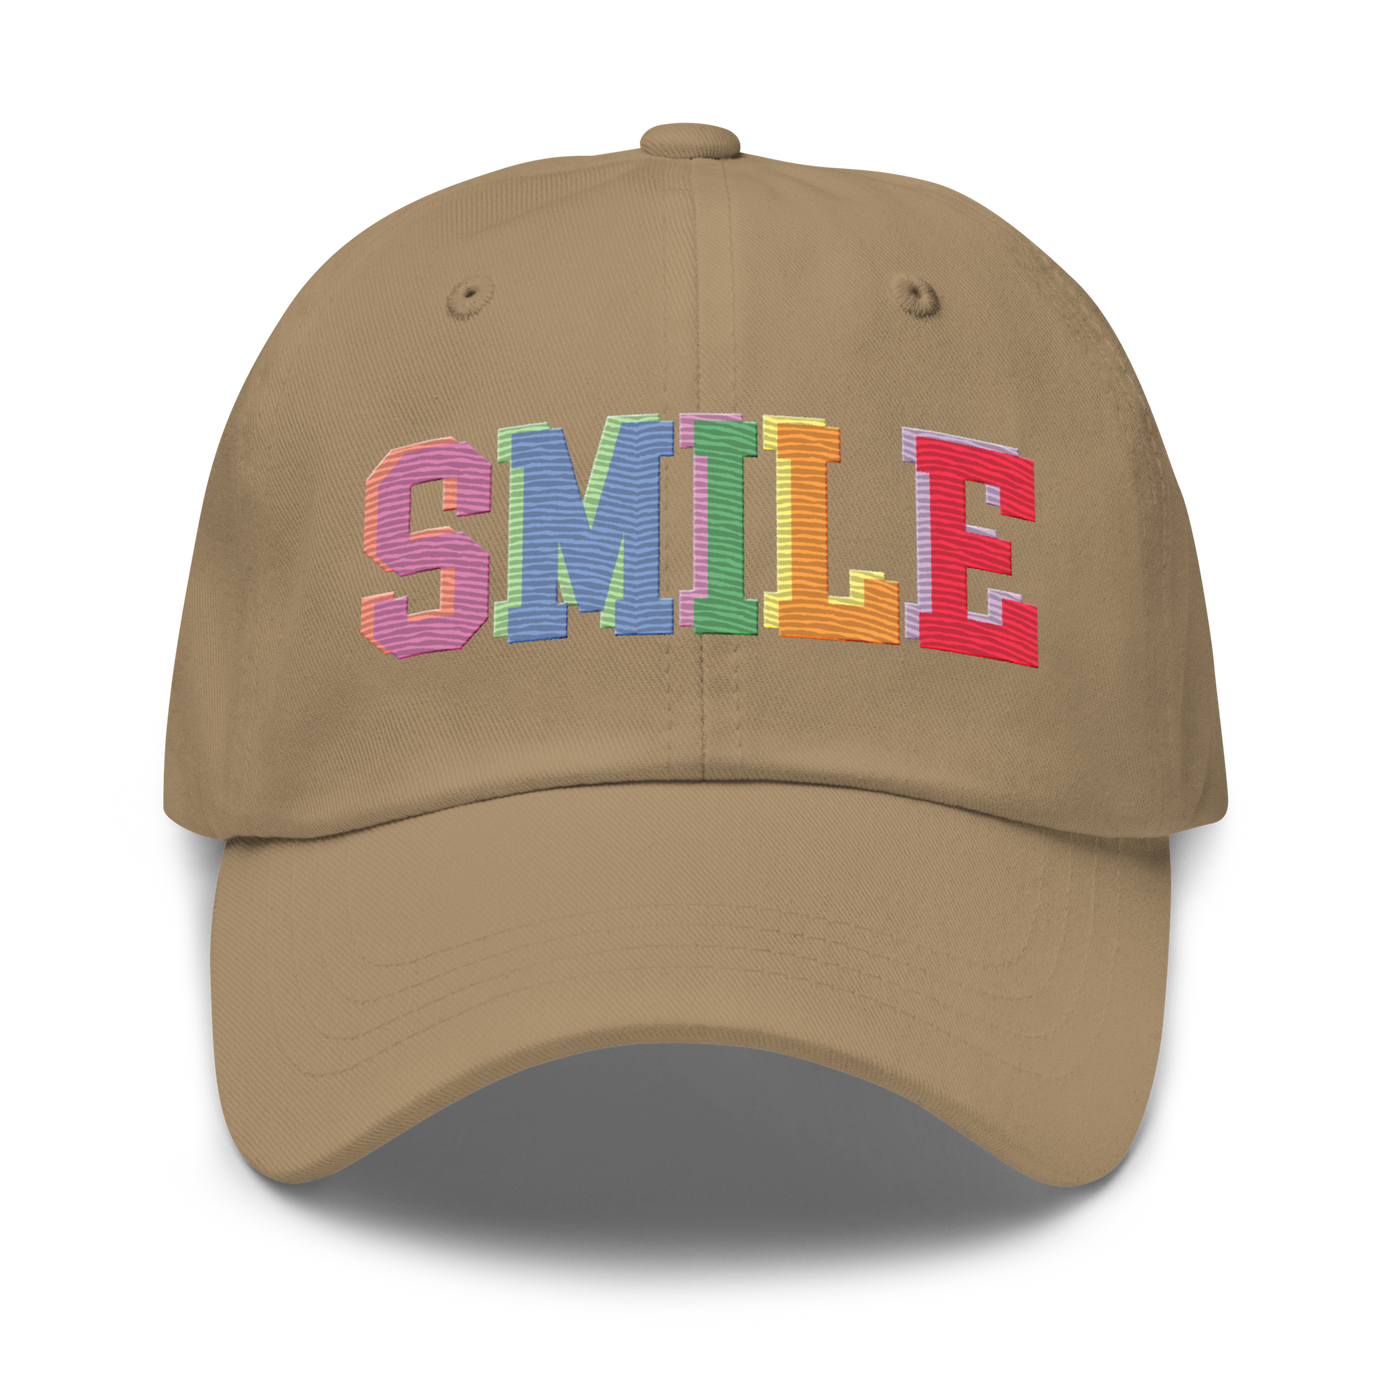 'Smile' Embroidered Hat